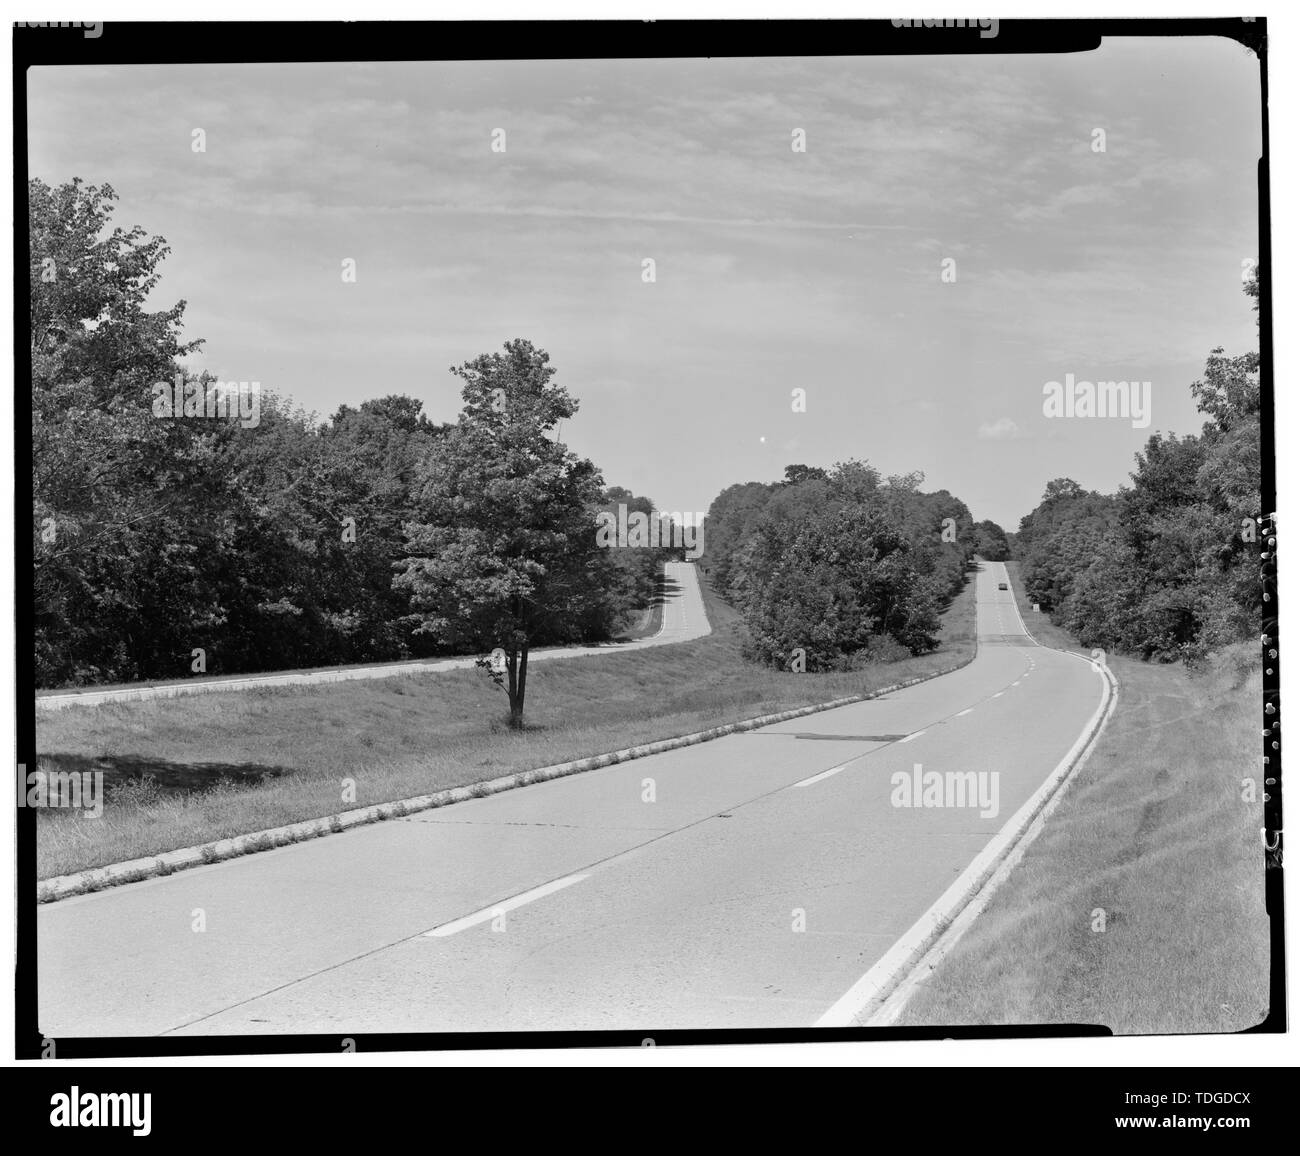 NORTHBOUND ALIGNMENT OF PARKWAY, DUTCHESS COUNTY MILE MARKER 132.2, VIEW N. - Taconic State Parkway, Poughkeepsie, Dutchess County, NY Stock Photo